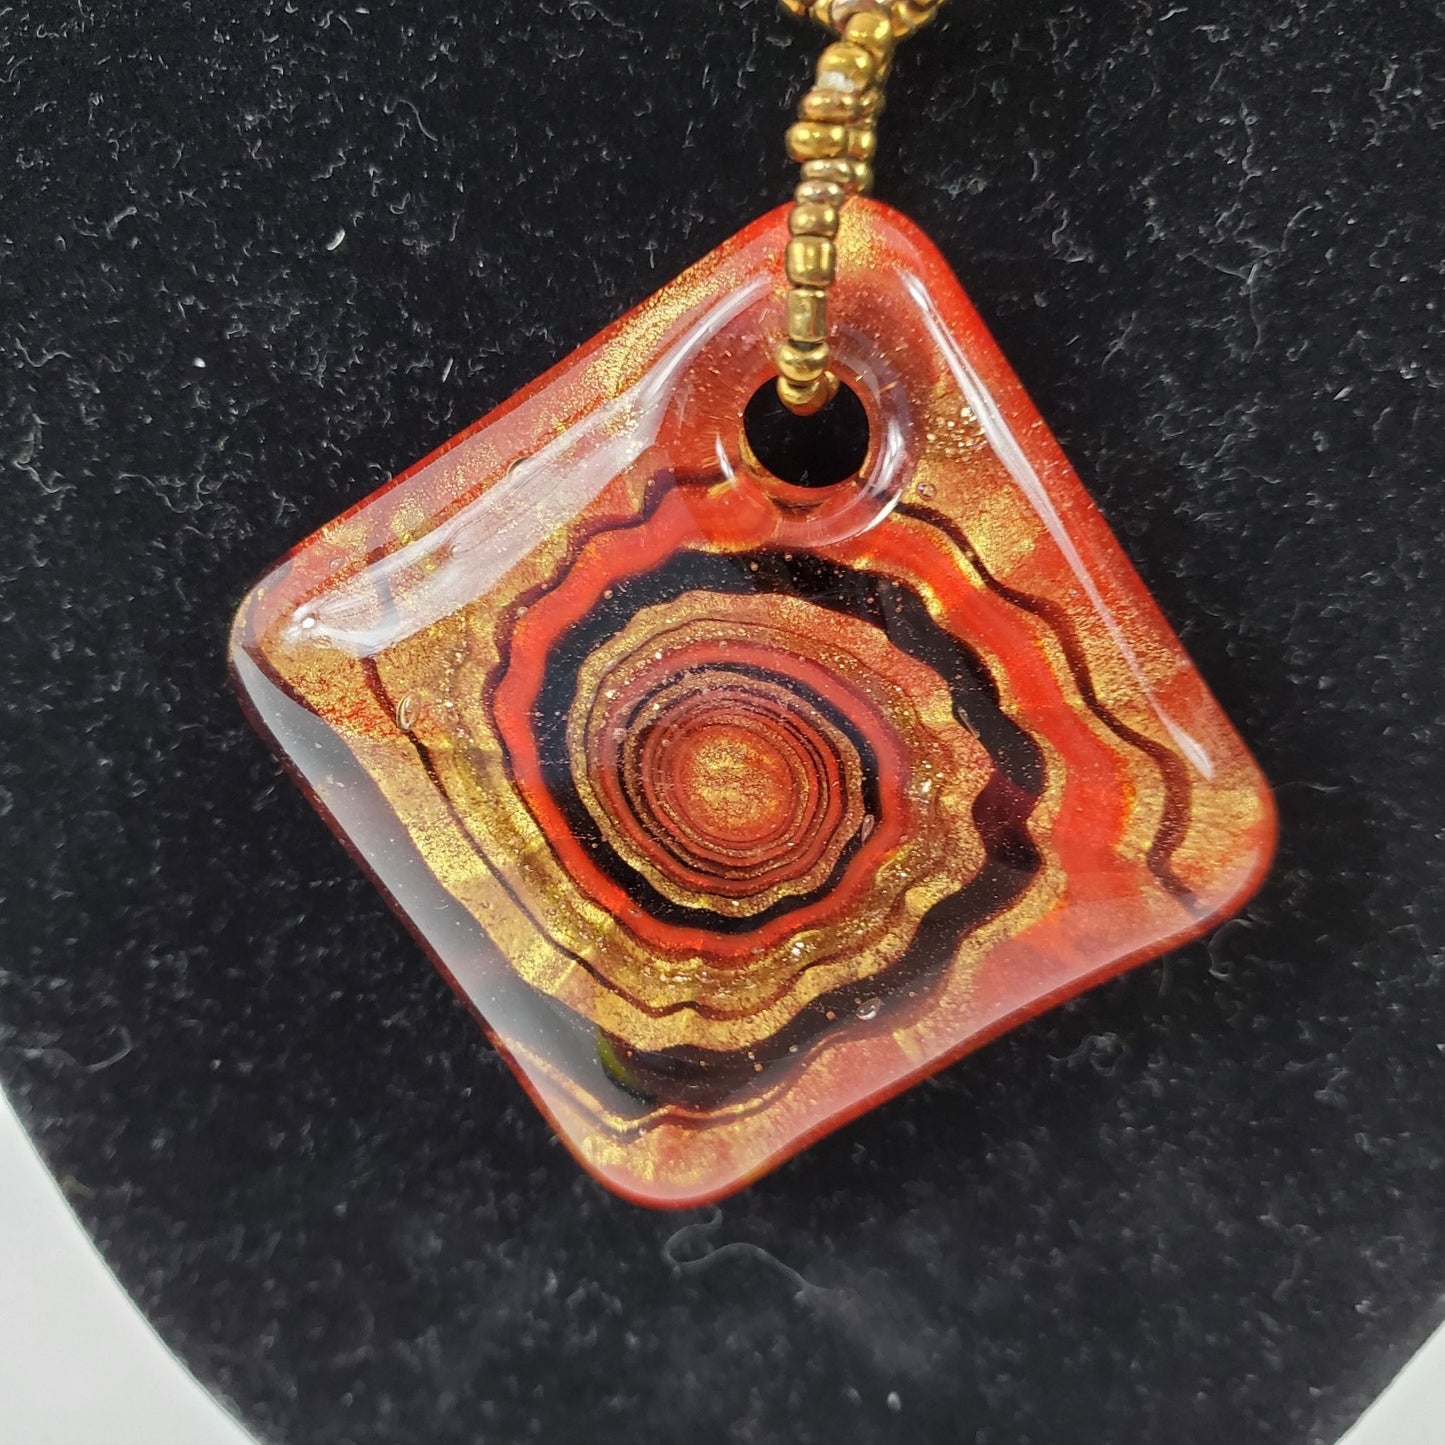 Vintage Blown Glass Red and Copper Swirl Art Pendant on 2 Stranded Copper Beaded Chain